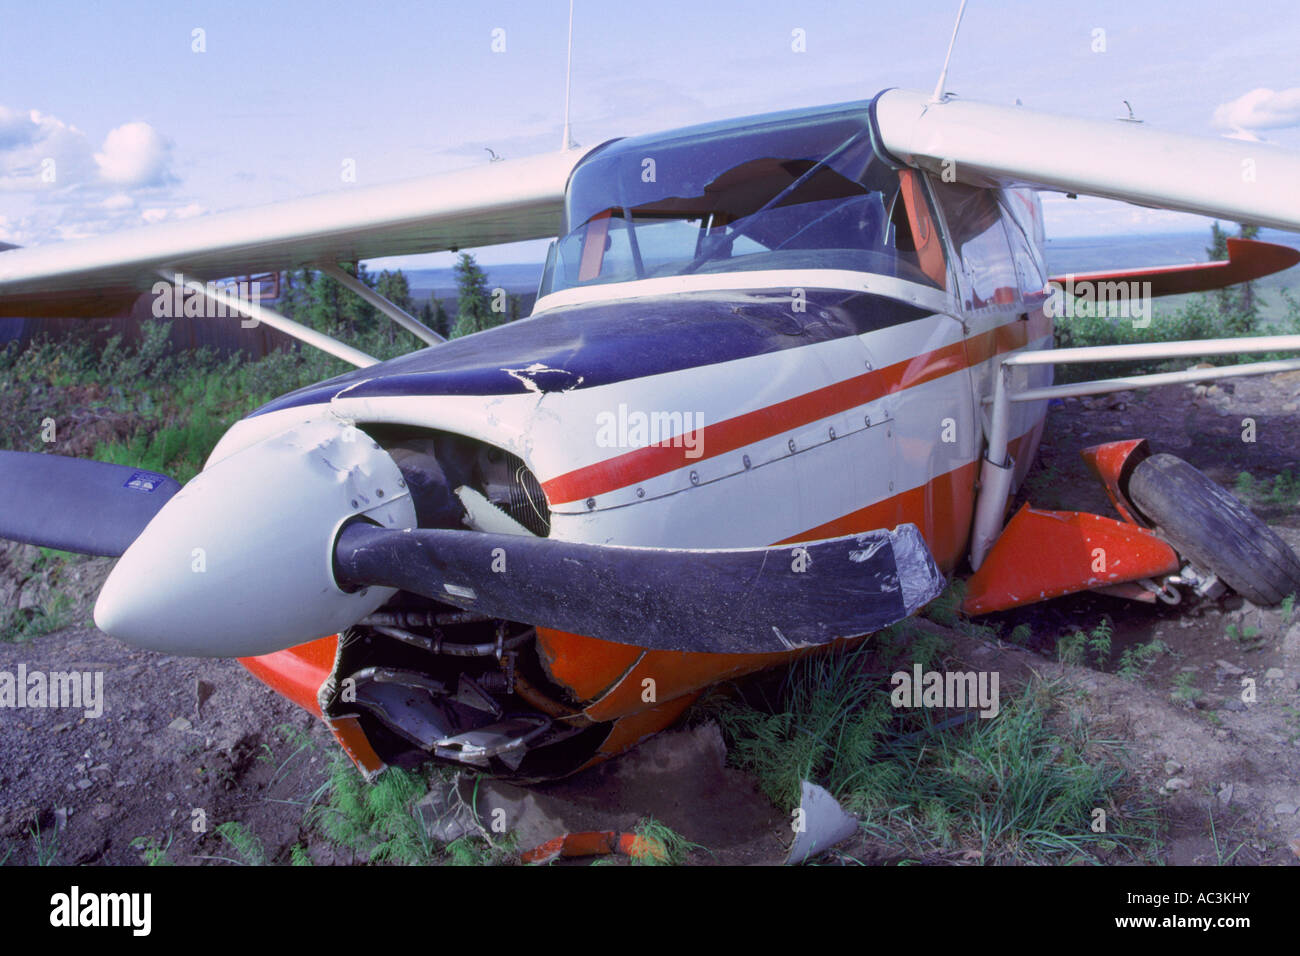 Aviation Accident, Plane Crash, Airplane Wreckage of a Small Single Engine Aircraft after crashing at Emergency Landing Site Stock Photo